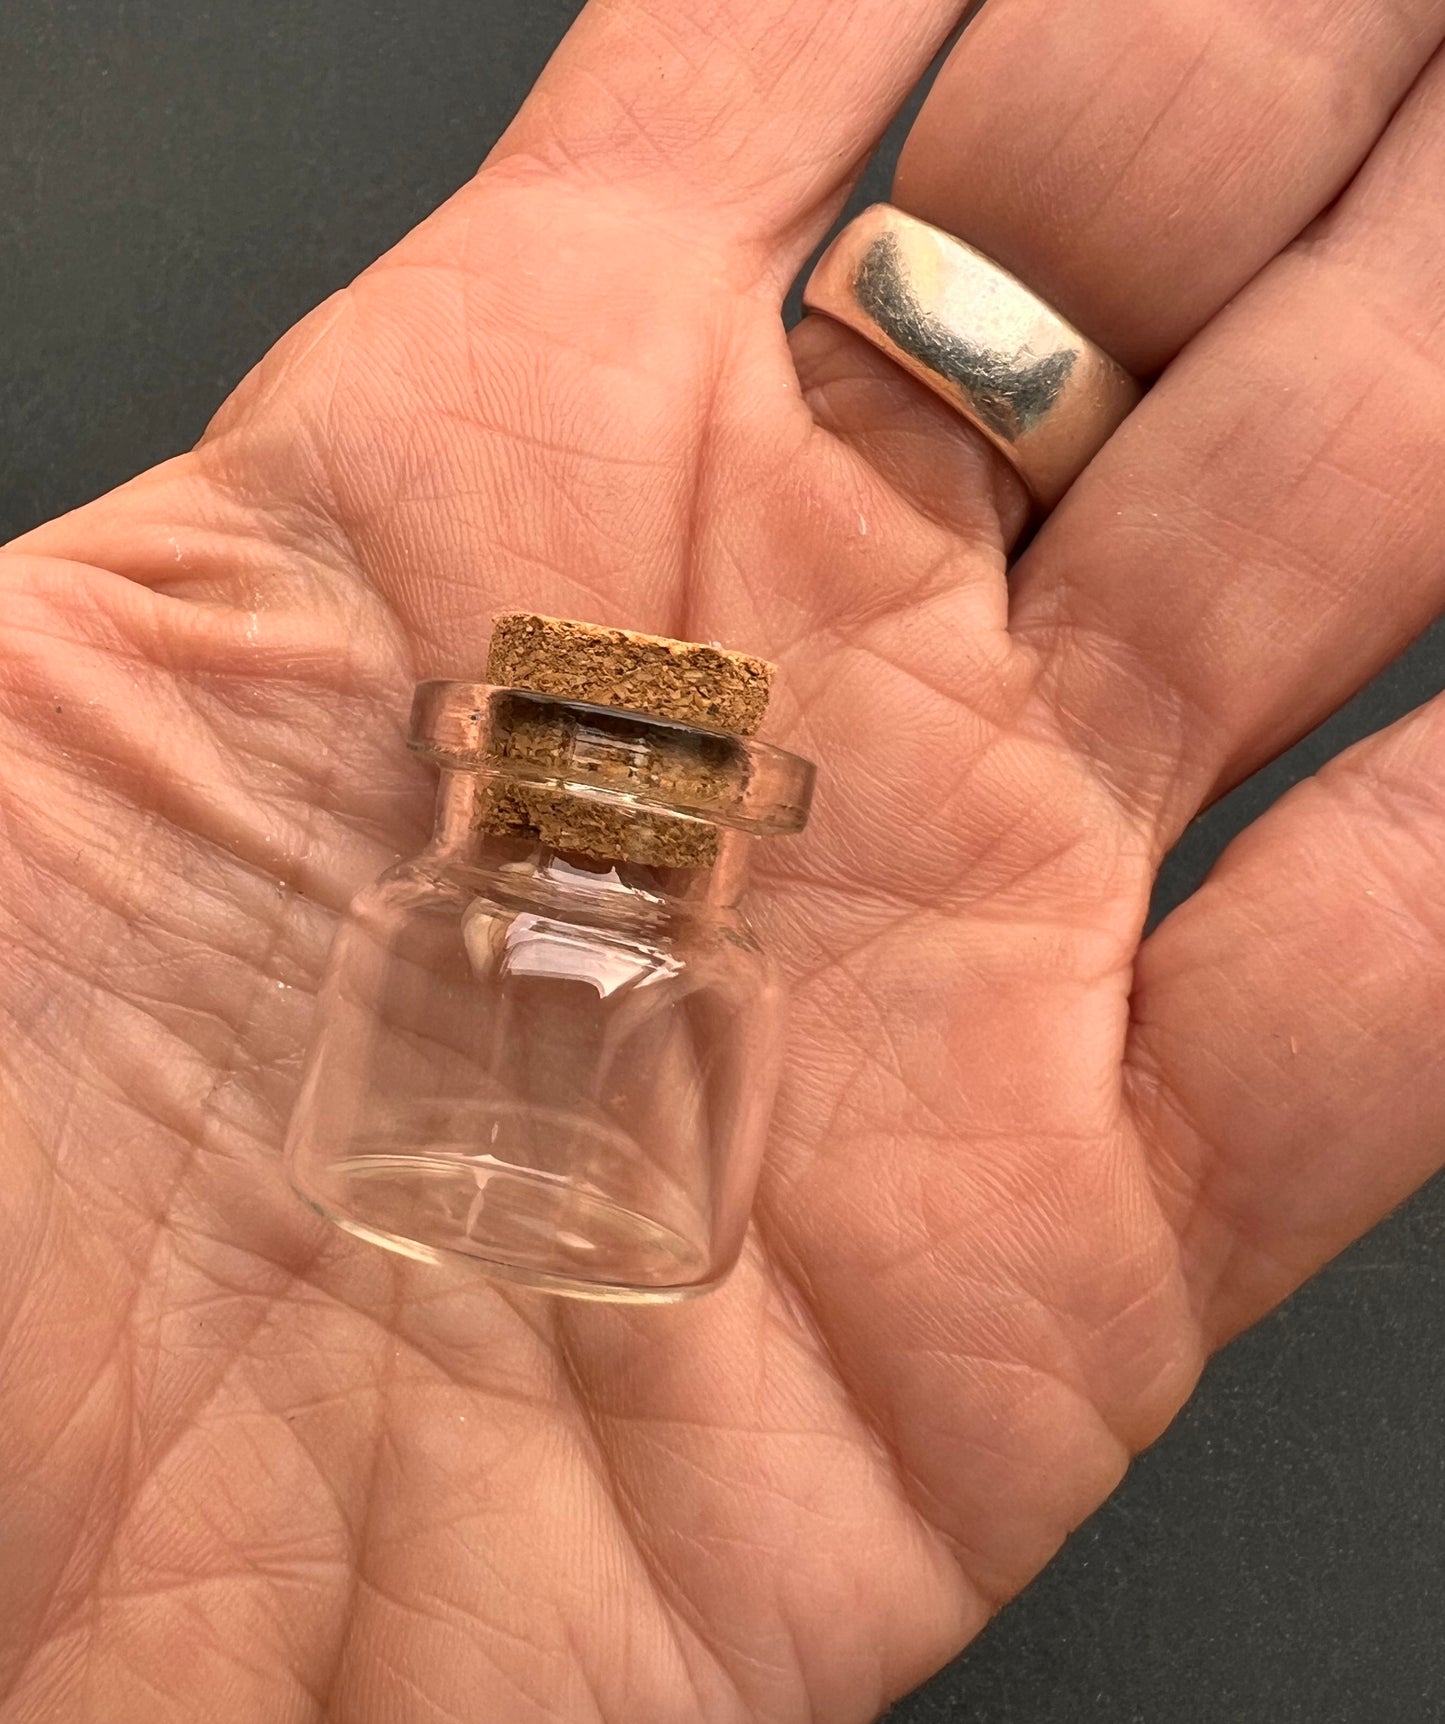 4cm or 2.5cm Glass Bottles with Corks for Tiny Things